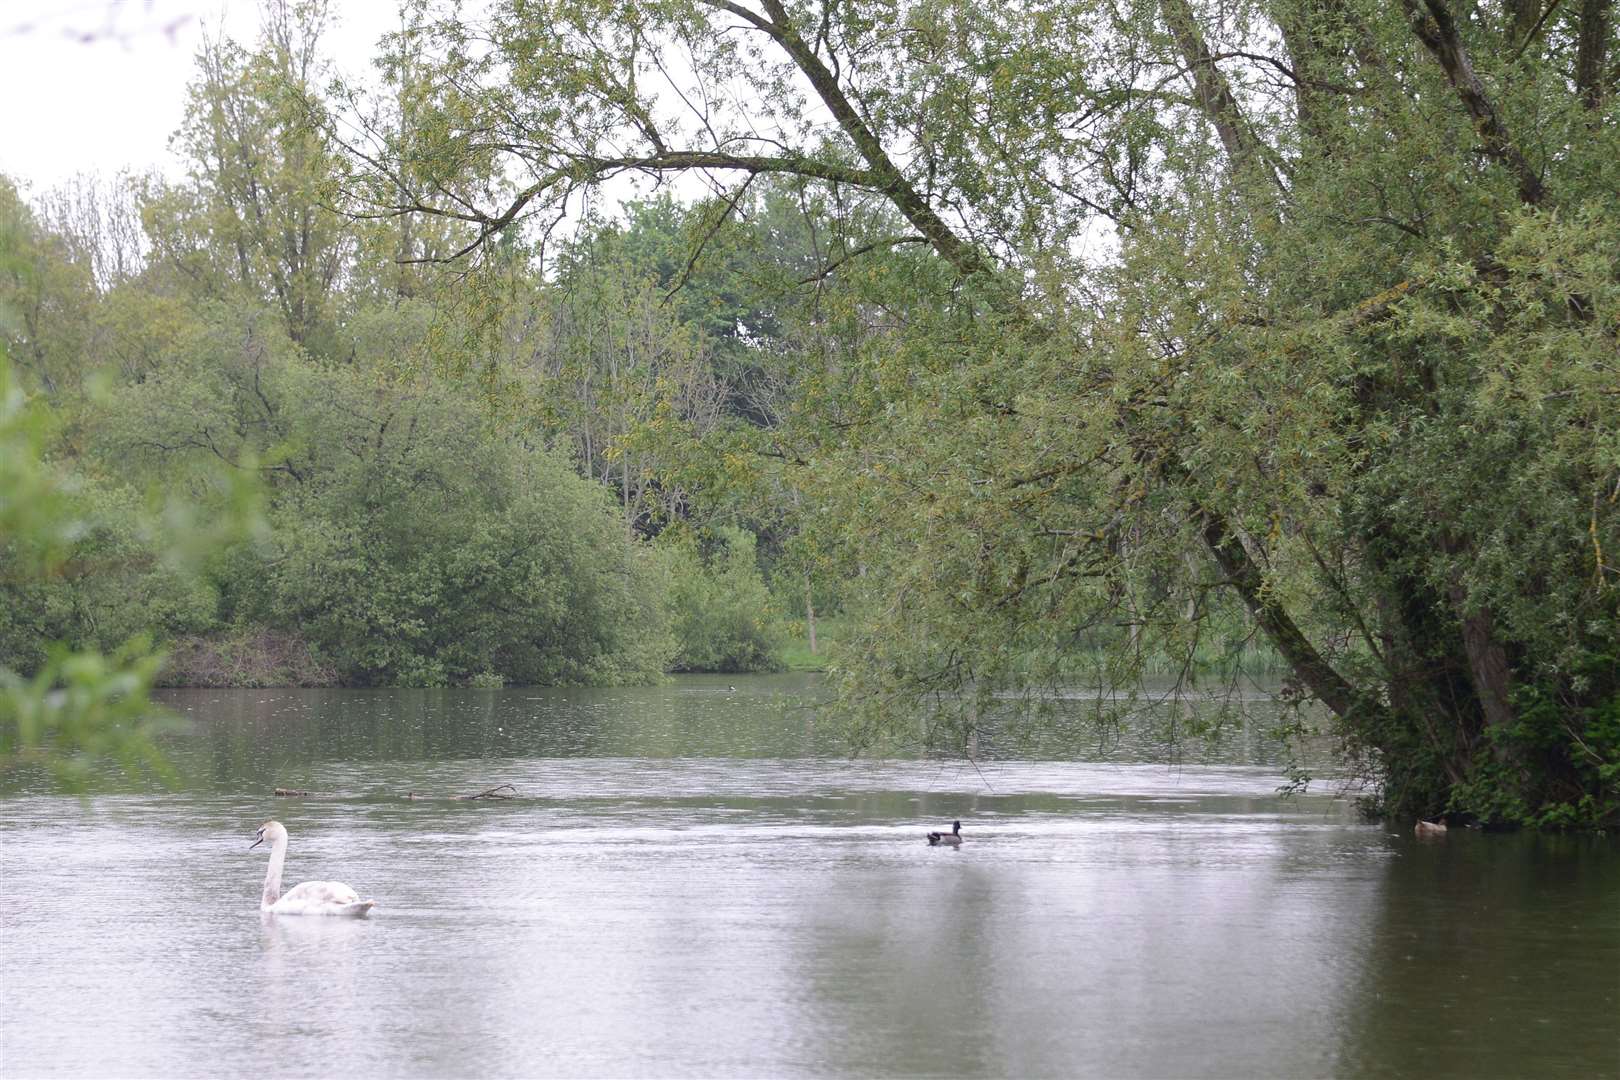 Singleton Lake is one of the areas covered by a Public Space Protection Order